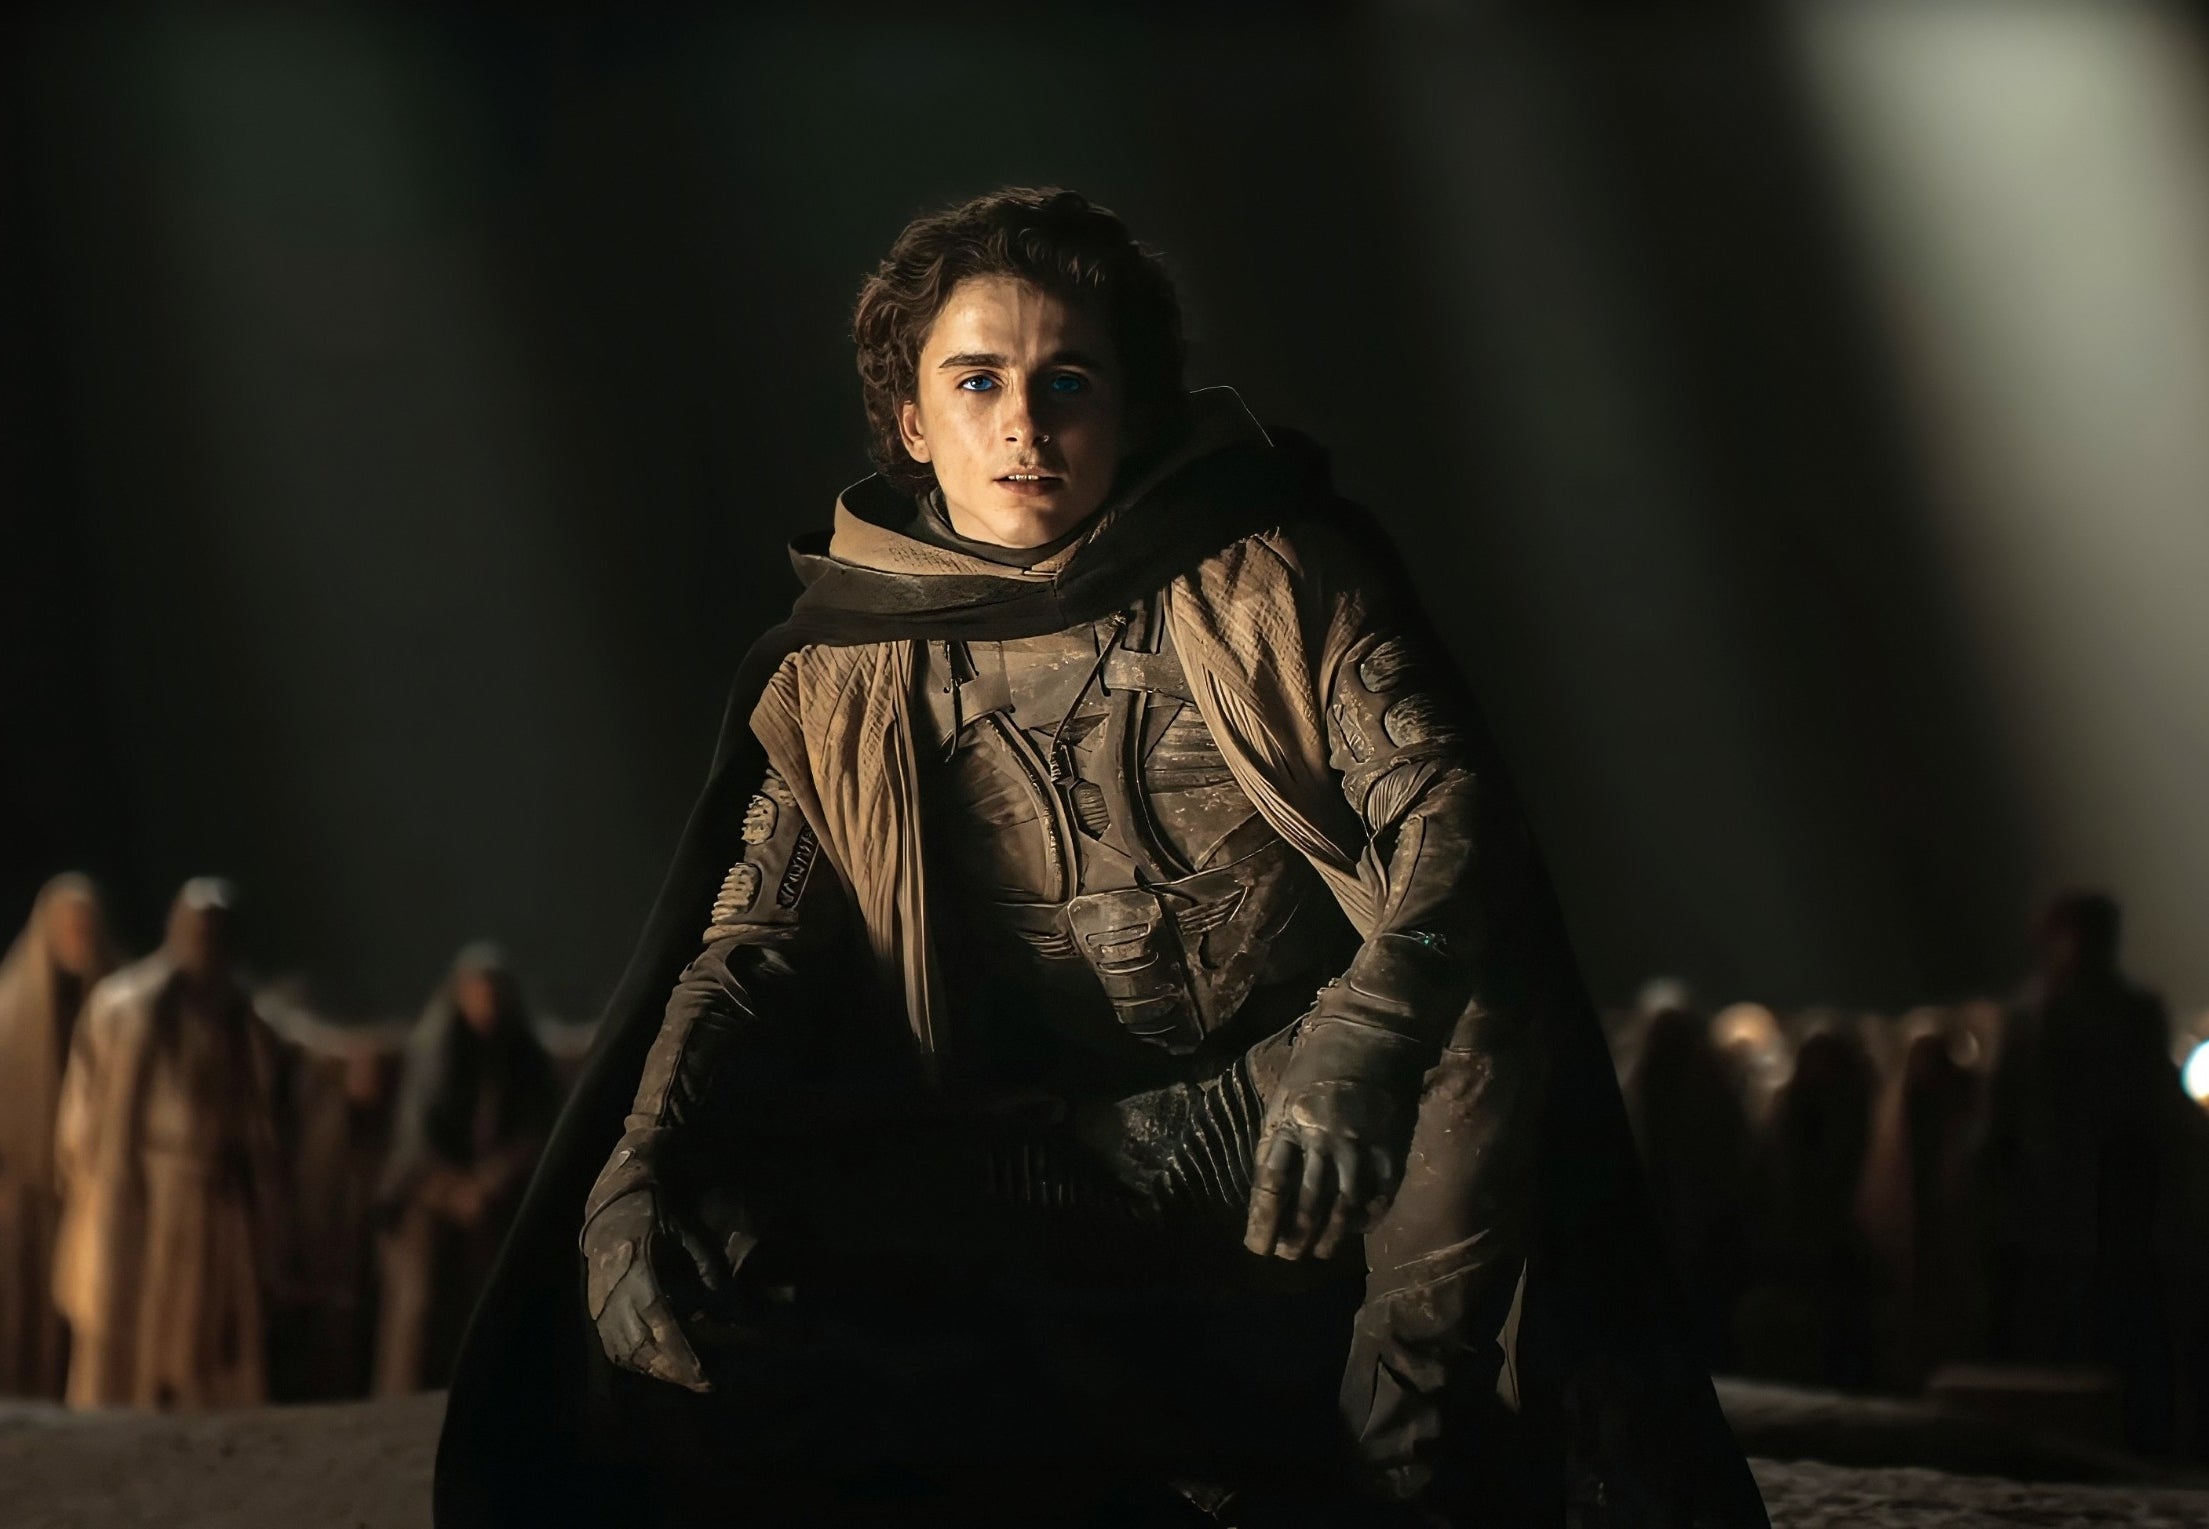 Timothée Chalamet as Paul Atreides in &quot;Dune,&quot; wearing a stillsuit, with a somber expression, in a desert setting at night